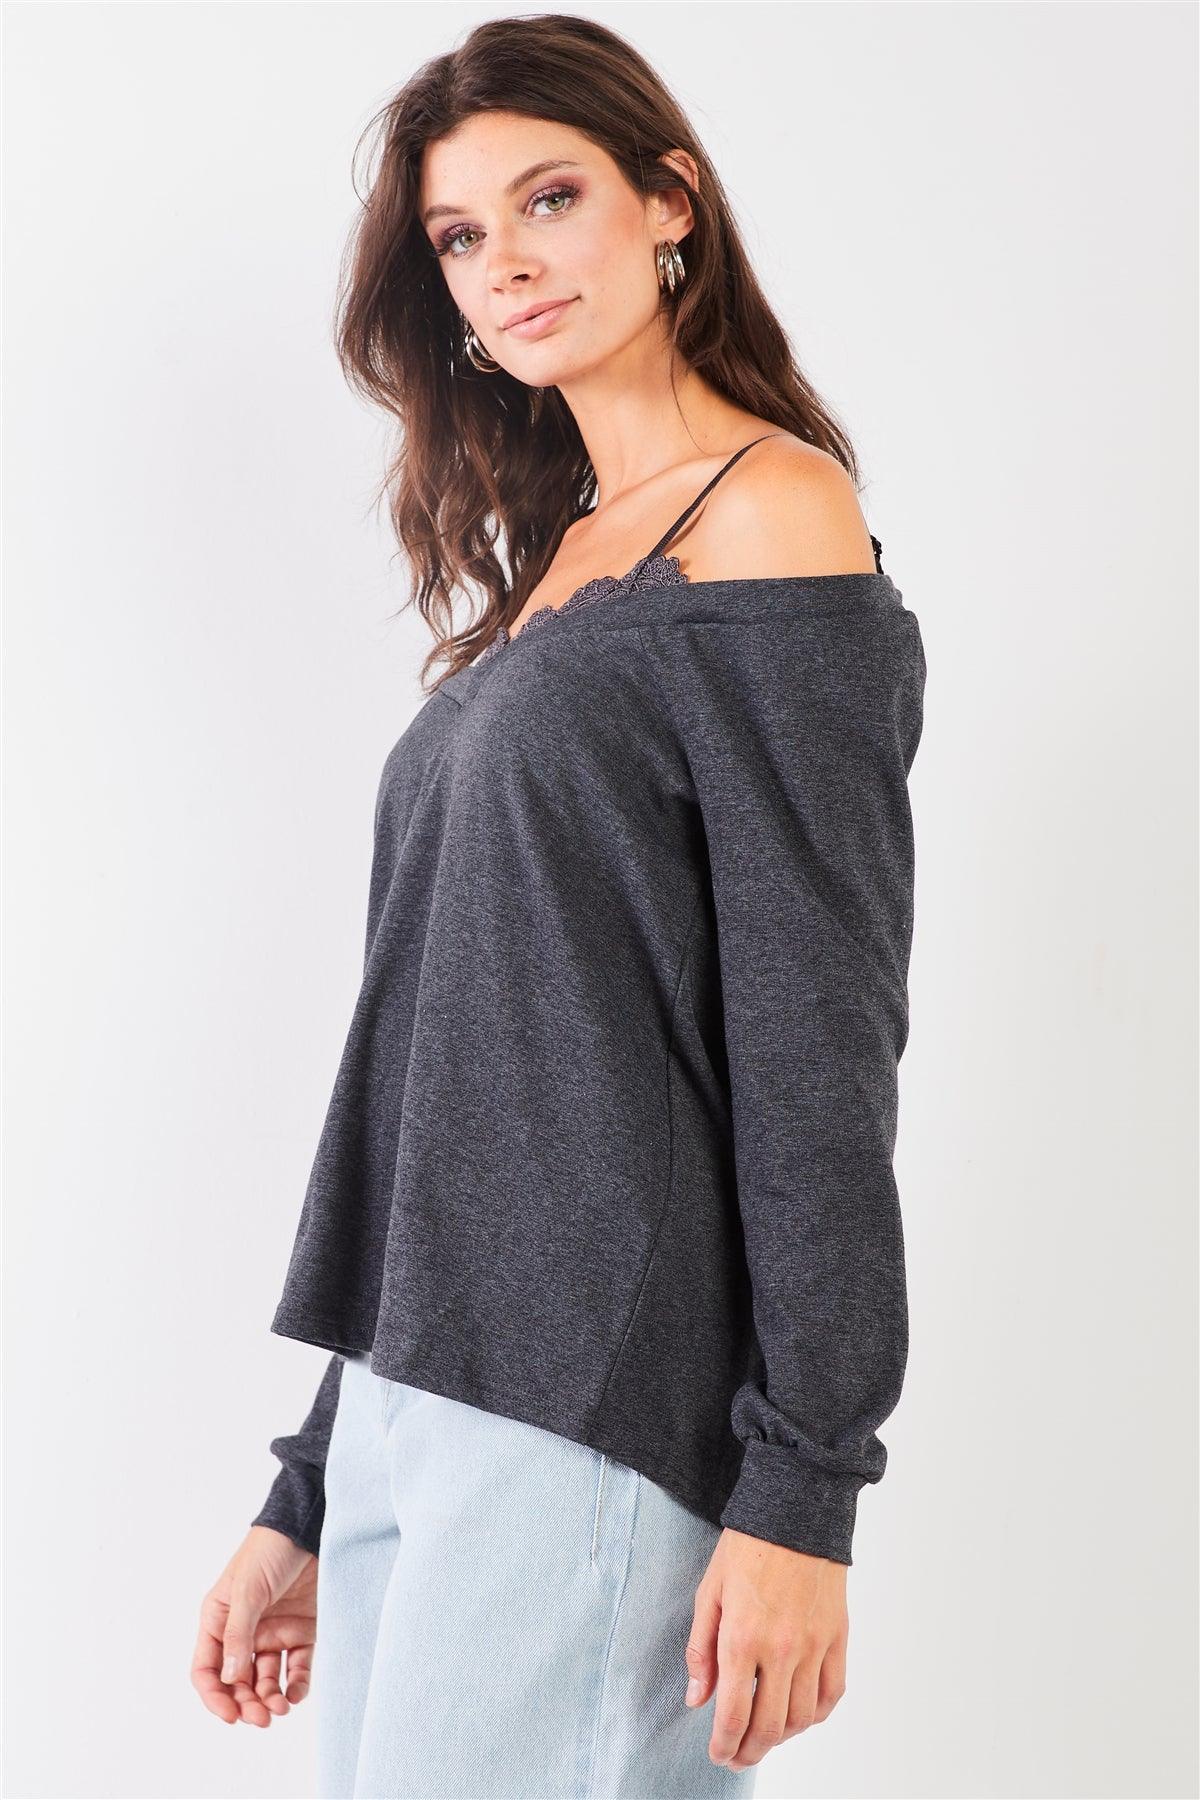 Charcoal Off-The-Shoulder Lace Trim Long Sleeve Sweetheart Neck Relaxed Top /2-2-1